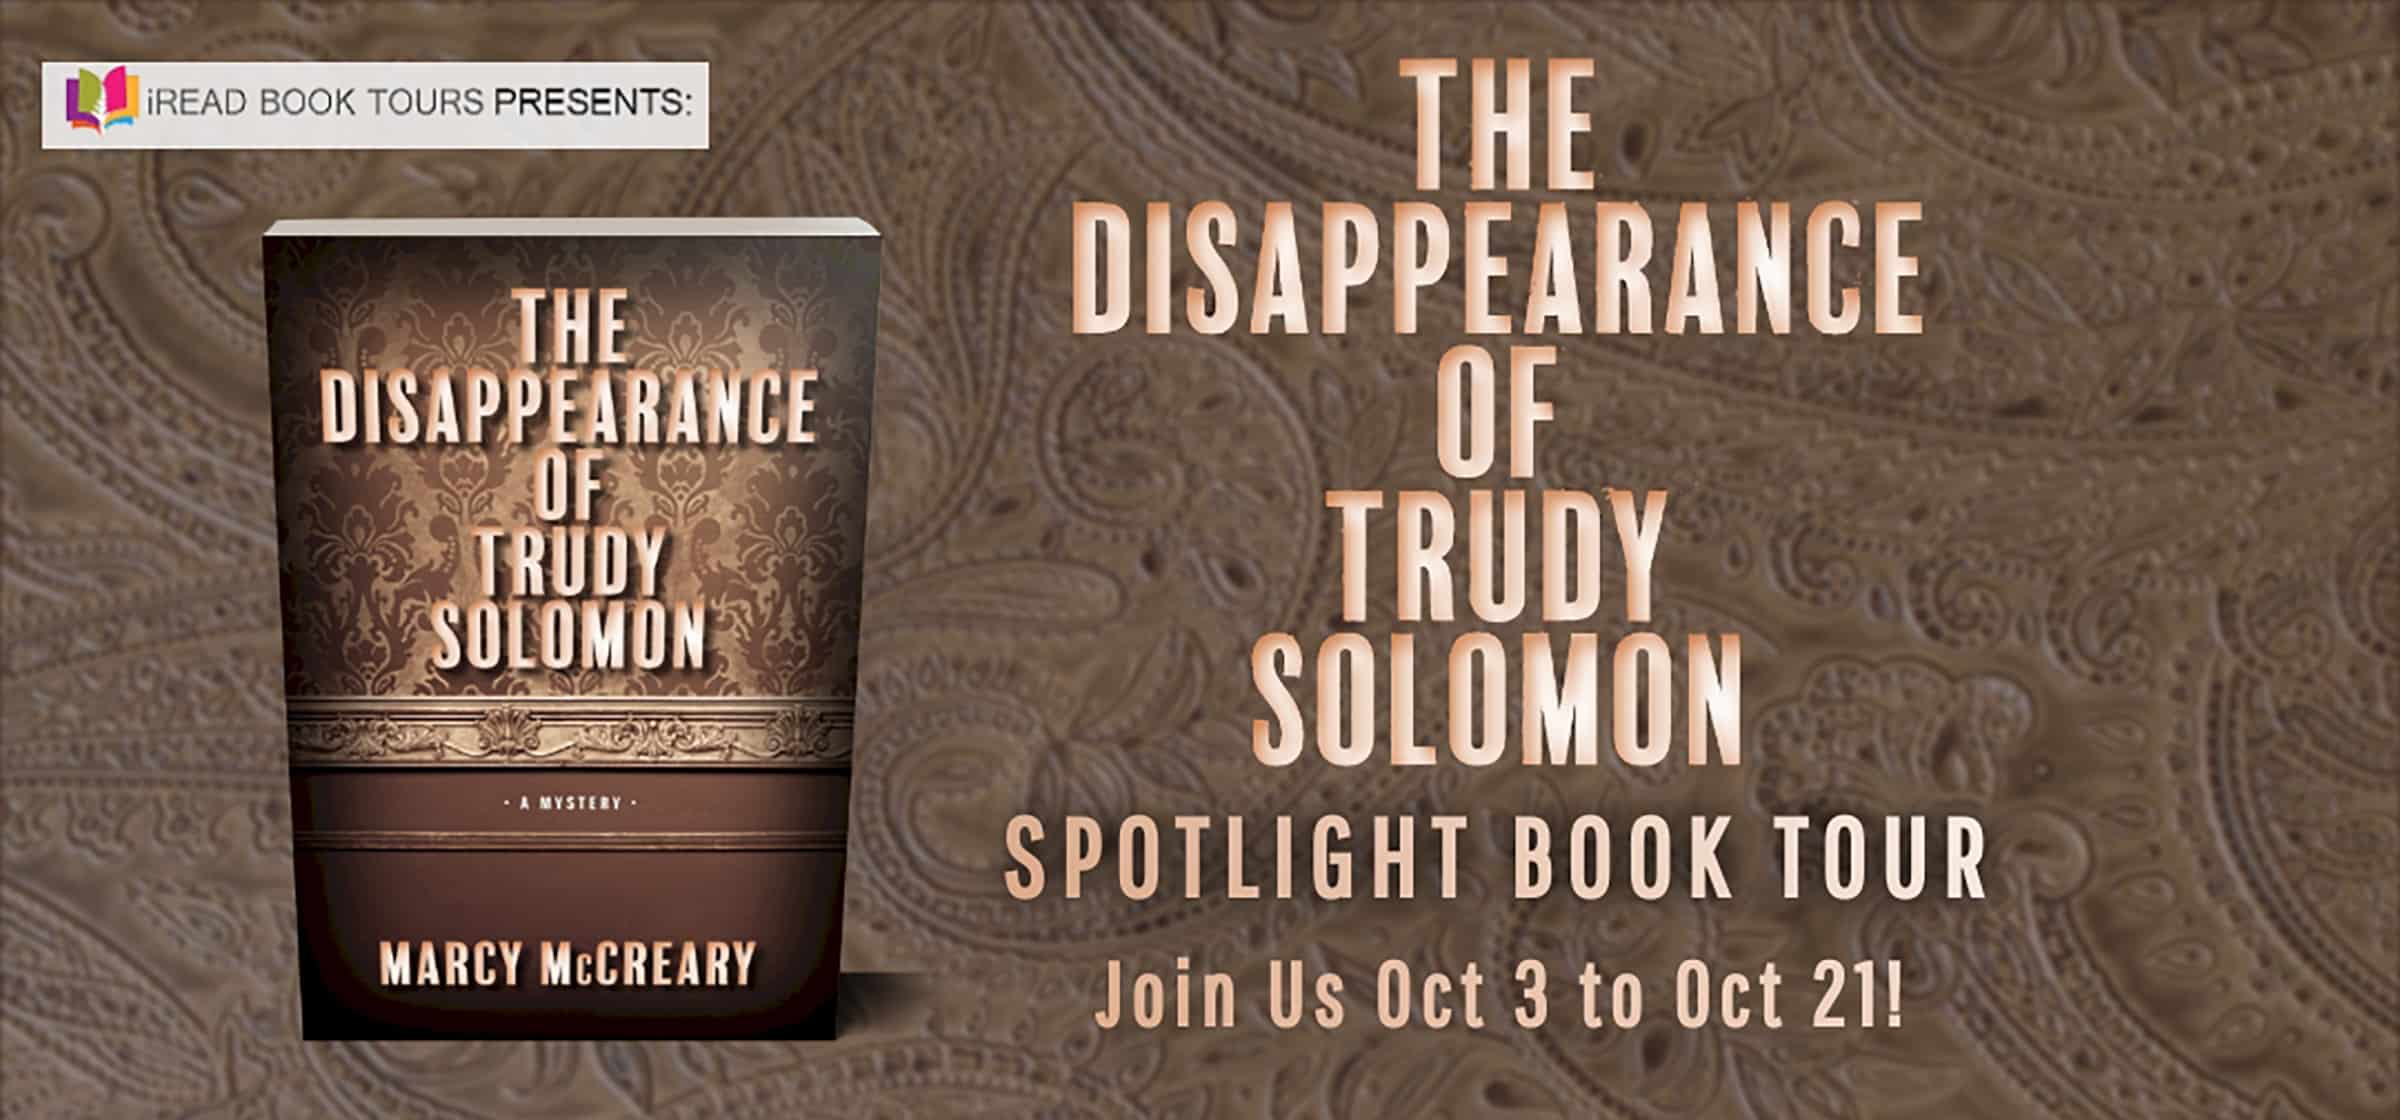 The Disappearance of Trudy Solomon by Marcy McCreary (Detective Susan Ford #1) | Spotlight, Guest Post, & Giveaway